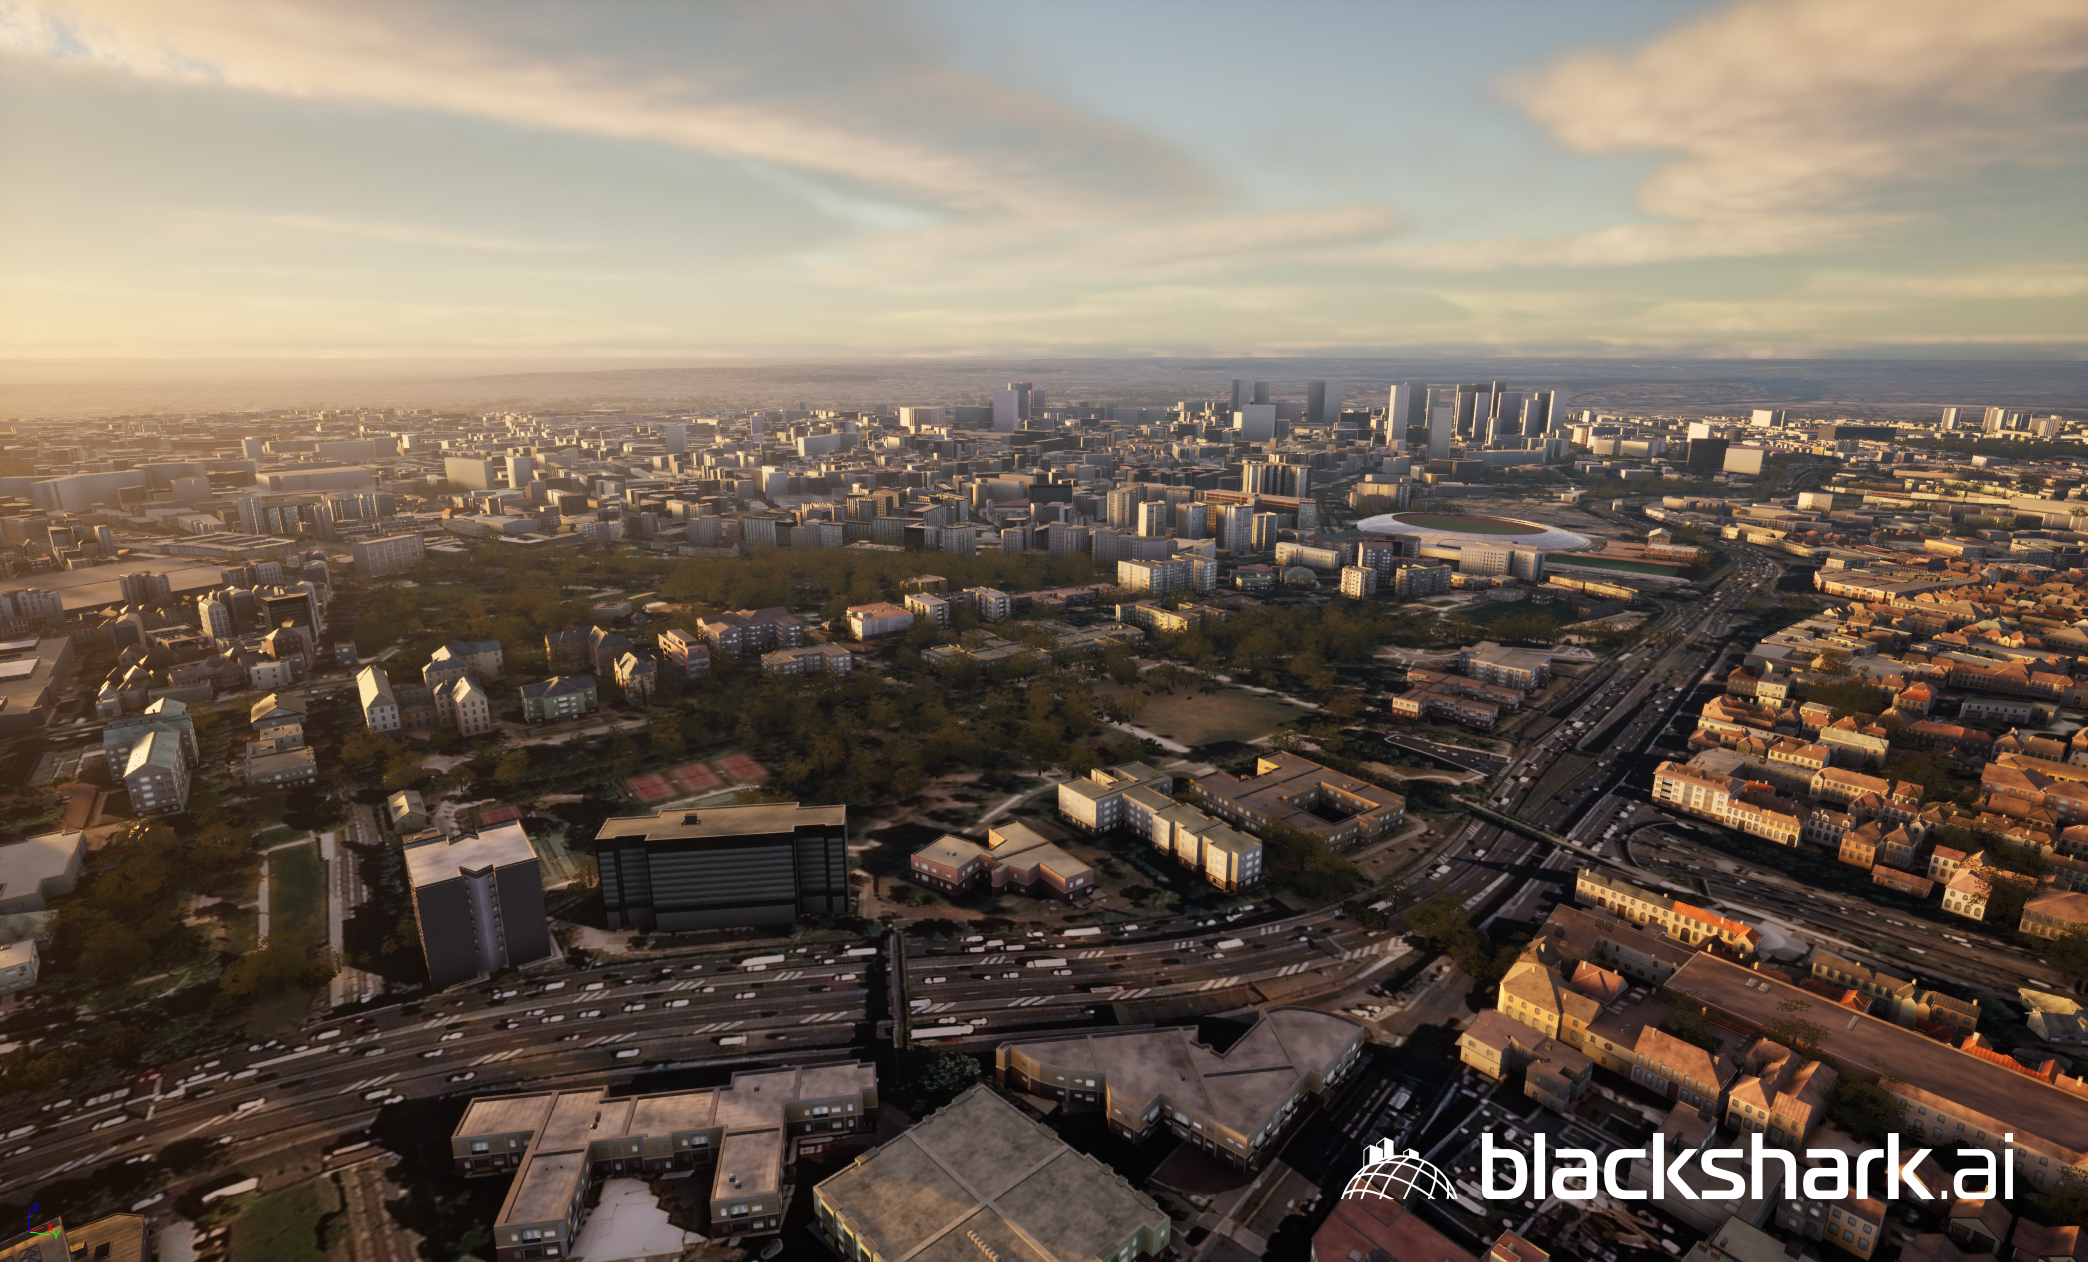 At its core, the Globe Plugin streams blackshark.ai’s SYNTH3D data in different LODs and contains 3D terrain, ground textures, buildings, infrastructure, and vegetation in an accurate, realistic, geo-typical, and regional-specific manner.